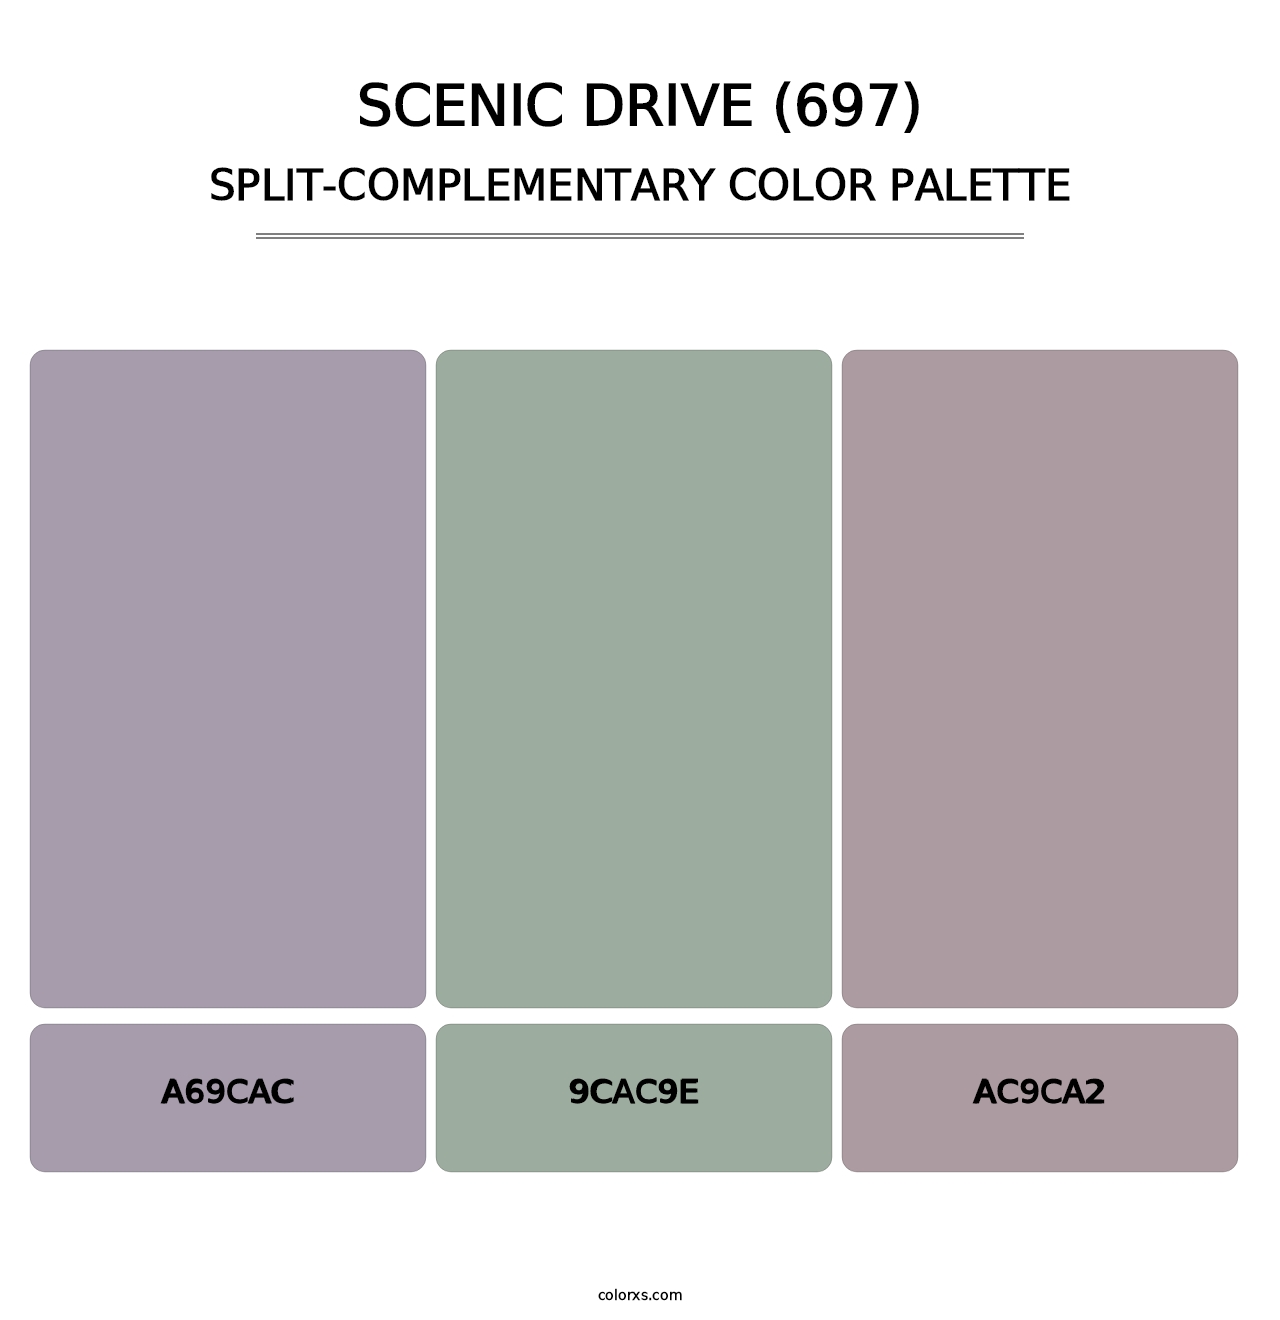 Scenic Drive (697) - Split-Complementary Color Palette